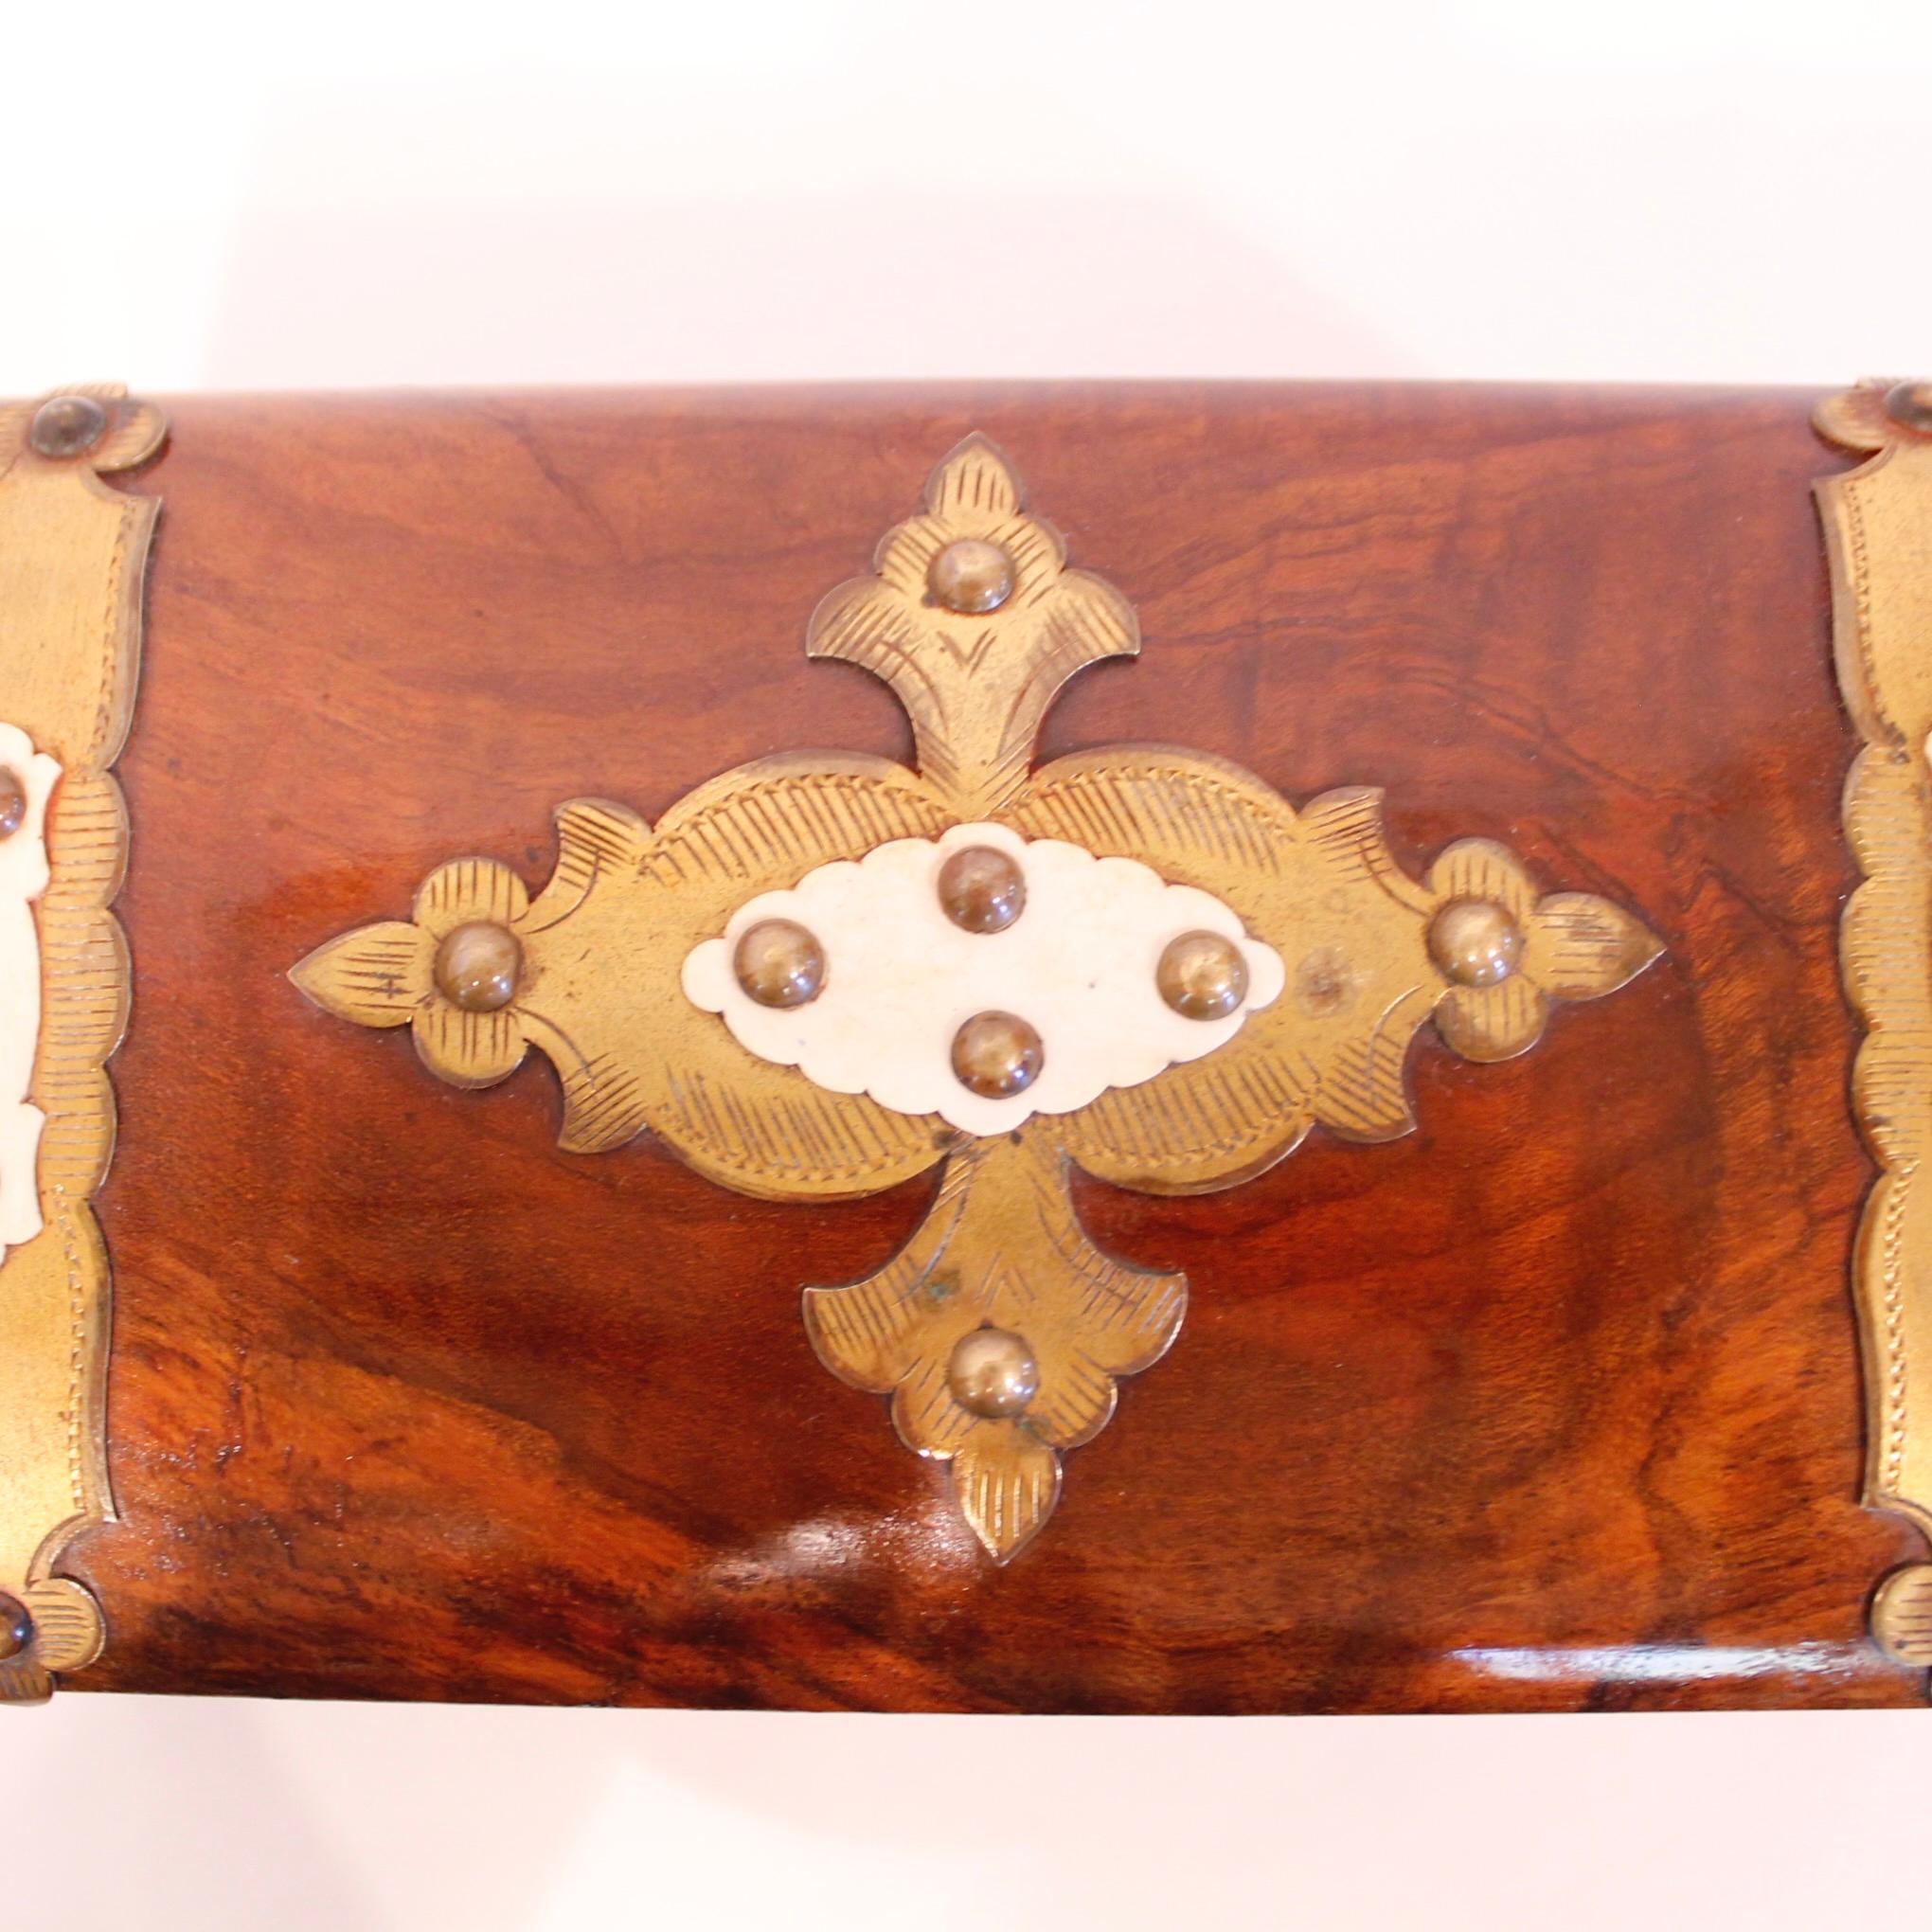 Embossed English Burl Walnut Tea Caddy With Decorative Brass Mounts For Sale